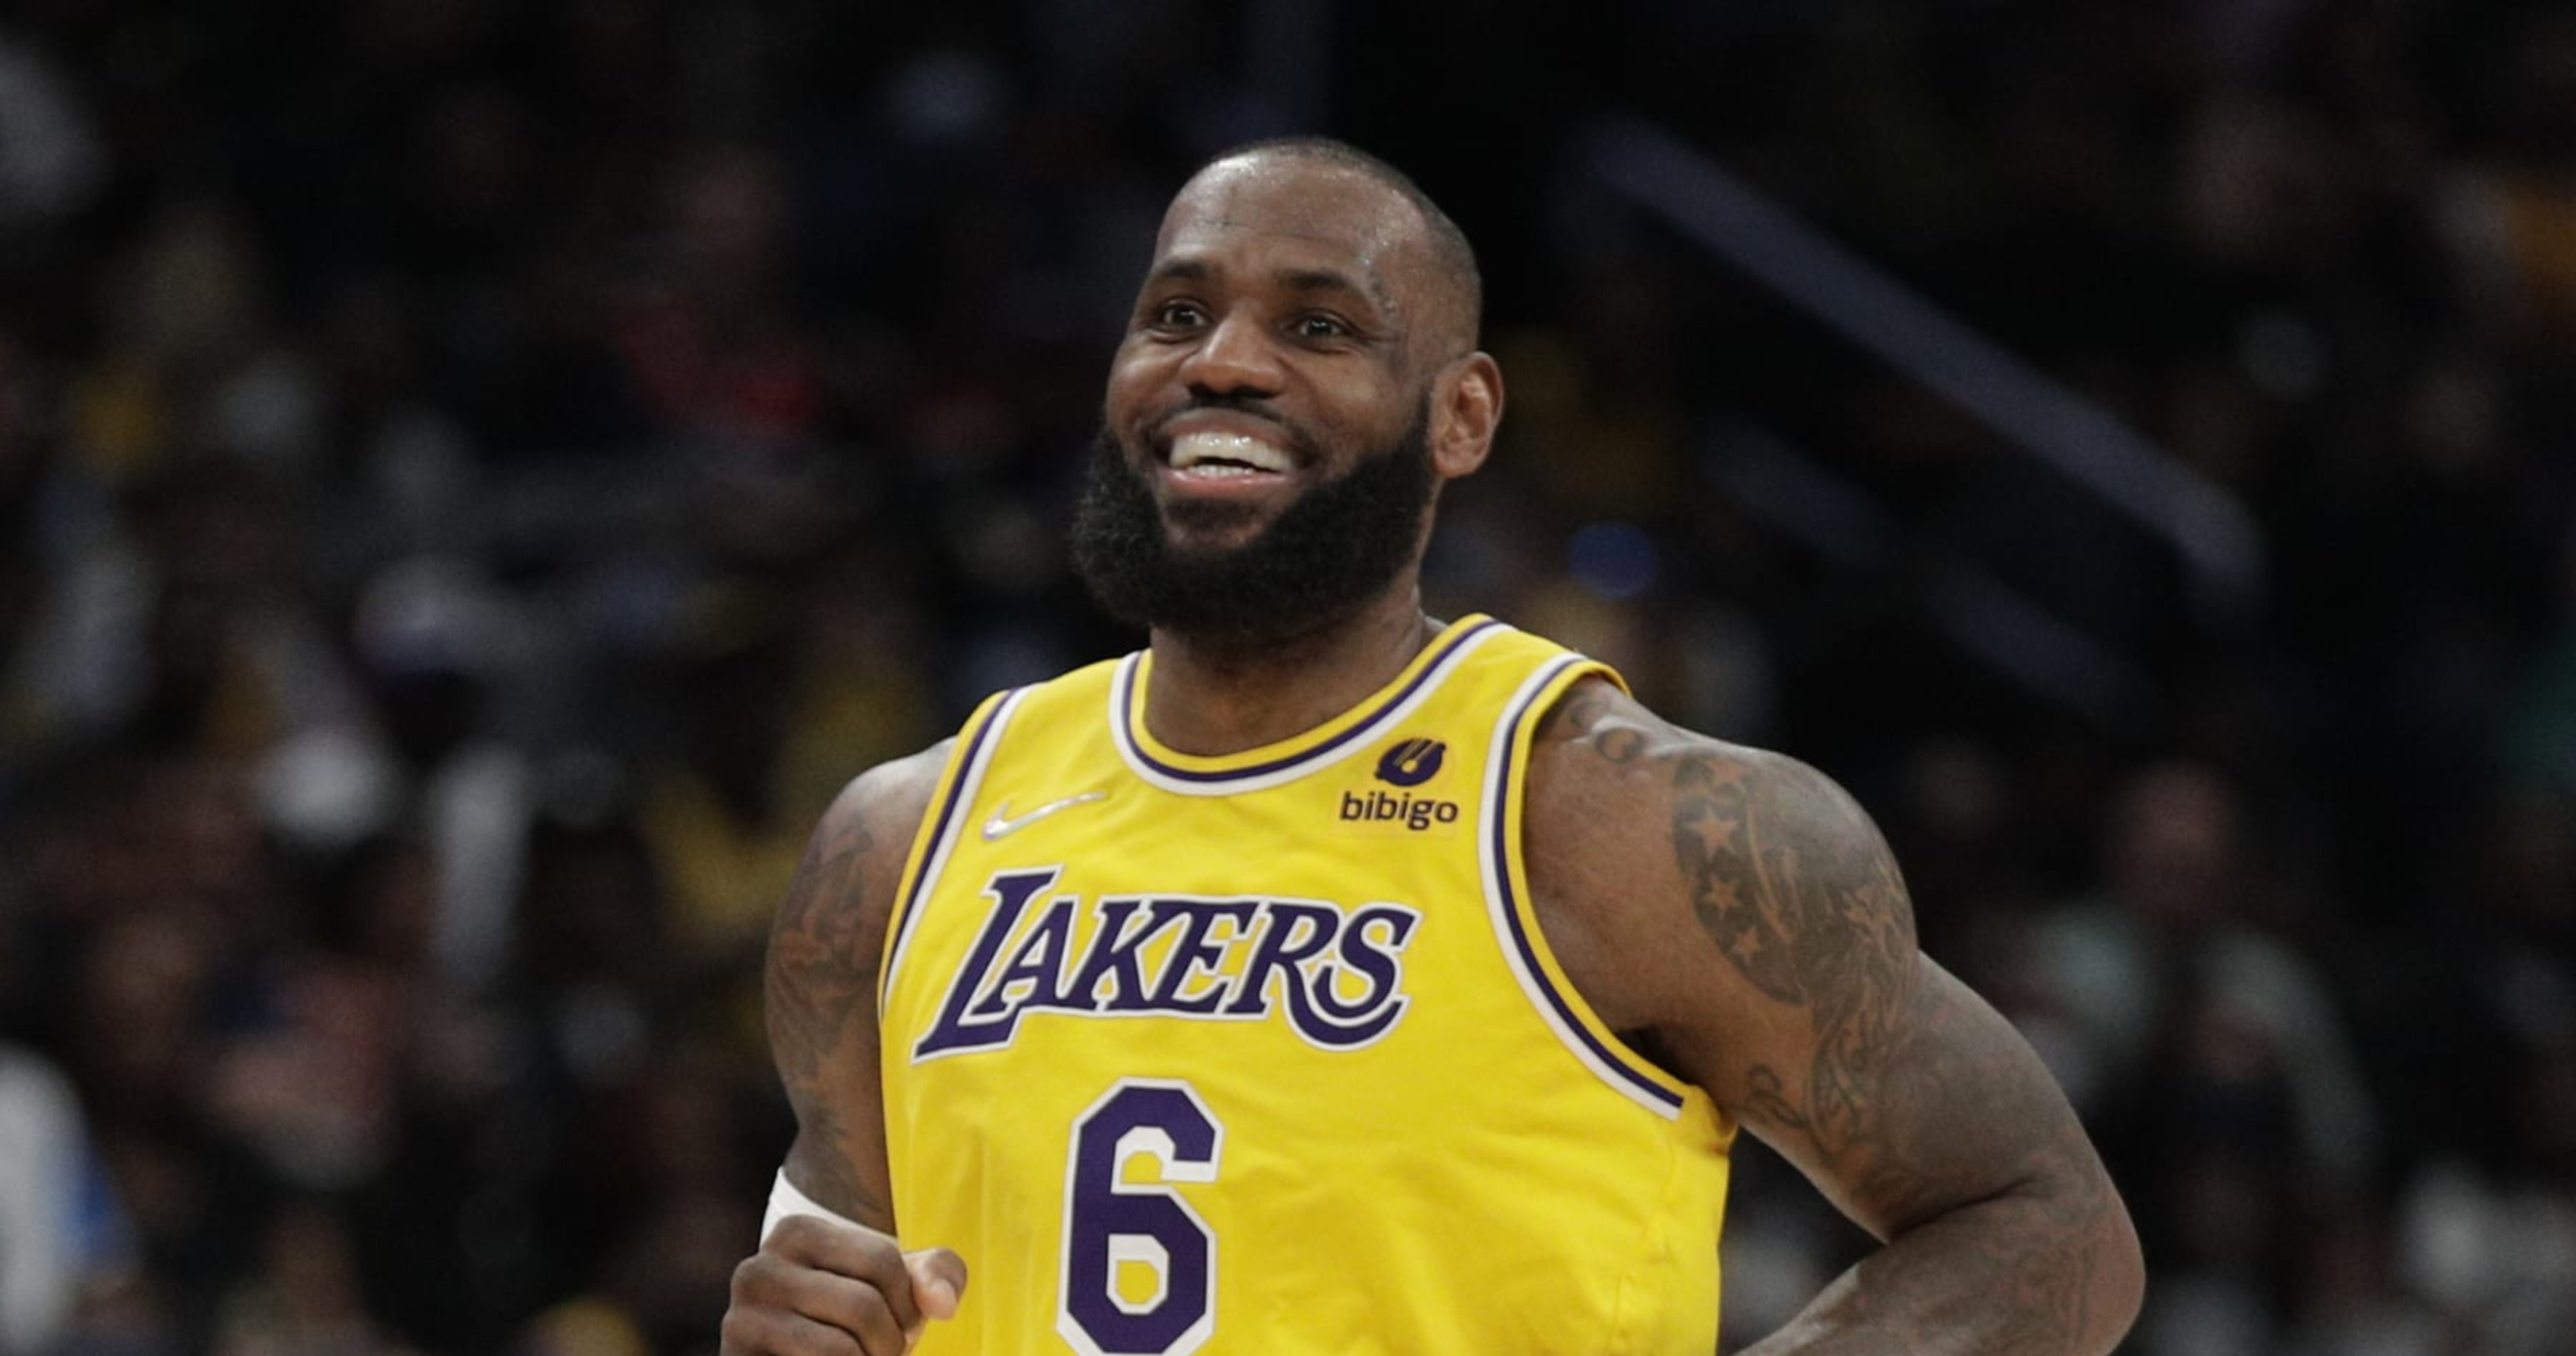 Jeanie Buss hopes LeBron James retires as a Laker: Is this even